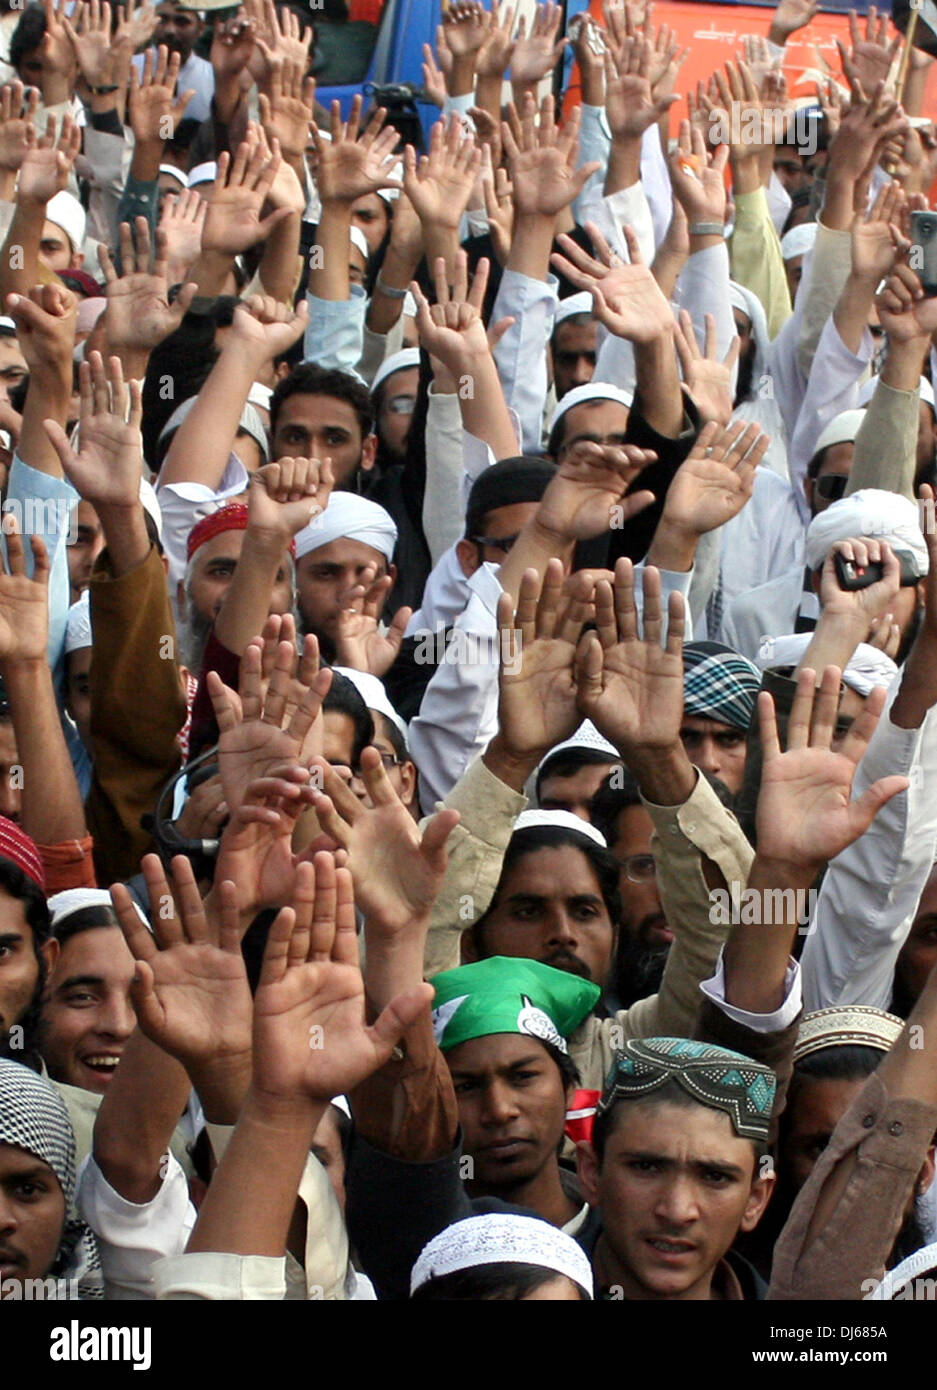 Lahore, Pakistan. 22nd November 2013. Supporters of religious group Ahl-i-Sunnat Wal Jamaat (ASWJ) shout slogans during a protest in eastern Pakistan's Lahore on Nov. 22, 2013. Hundreds of thousands Pakistanis protested across the country on Friday against last week's violence in garrison city of Rawalpindi that killed 11 people. (Xinhua/Jamil Ahmed/Alamy Live News) Stock Photo